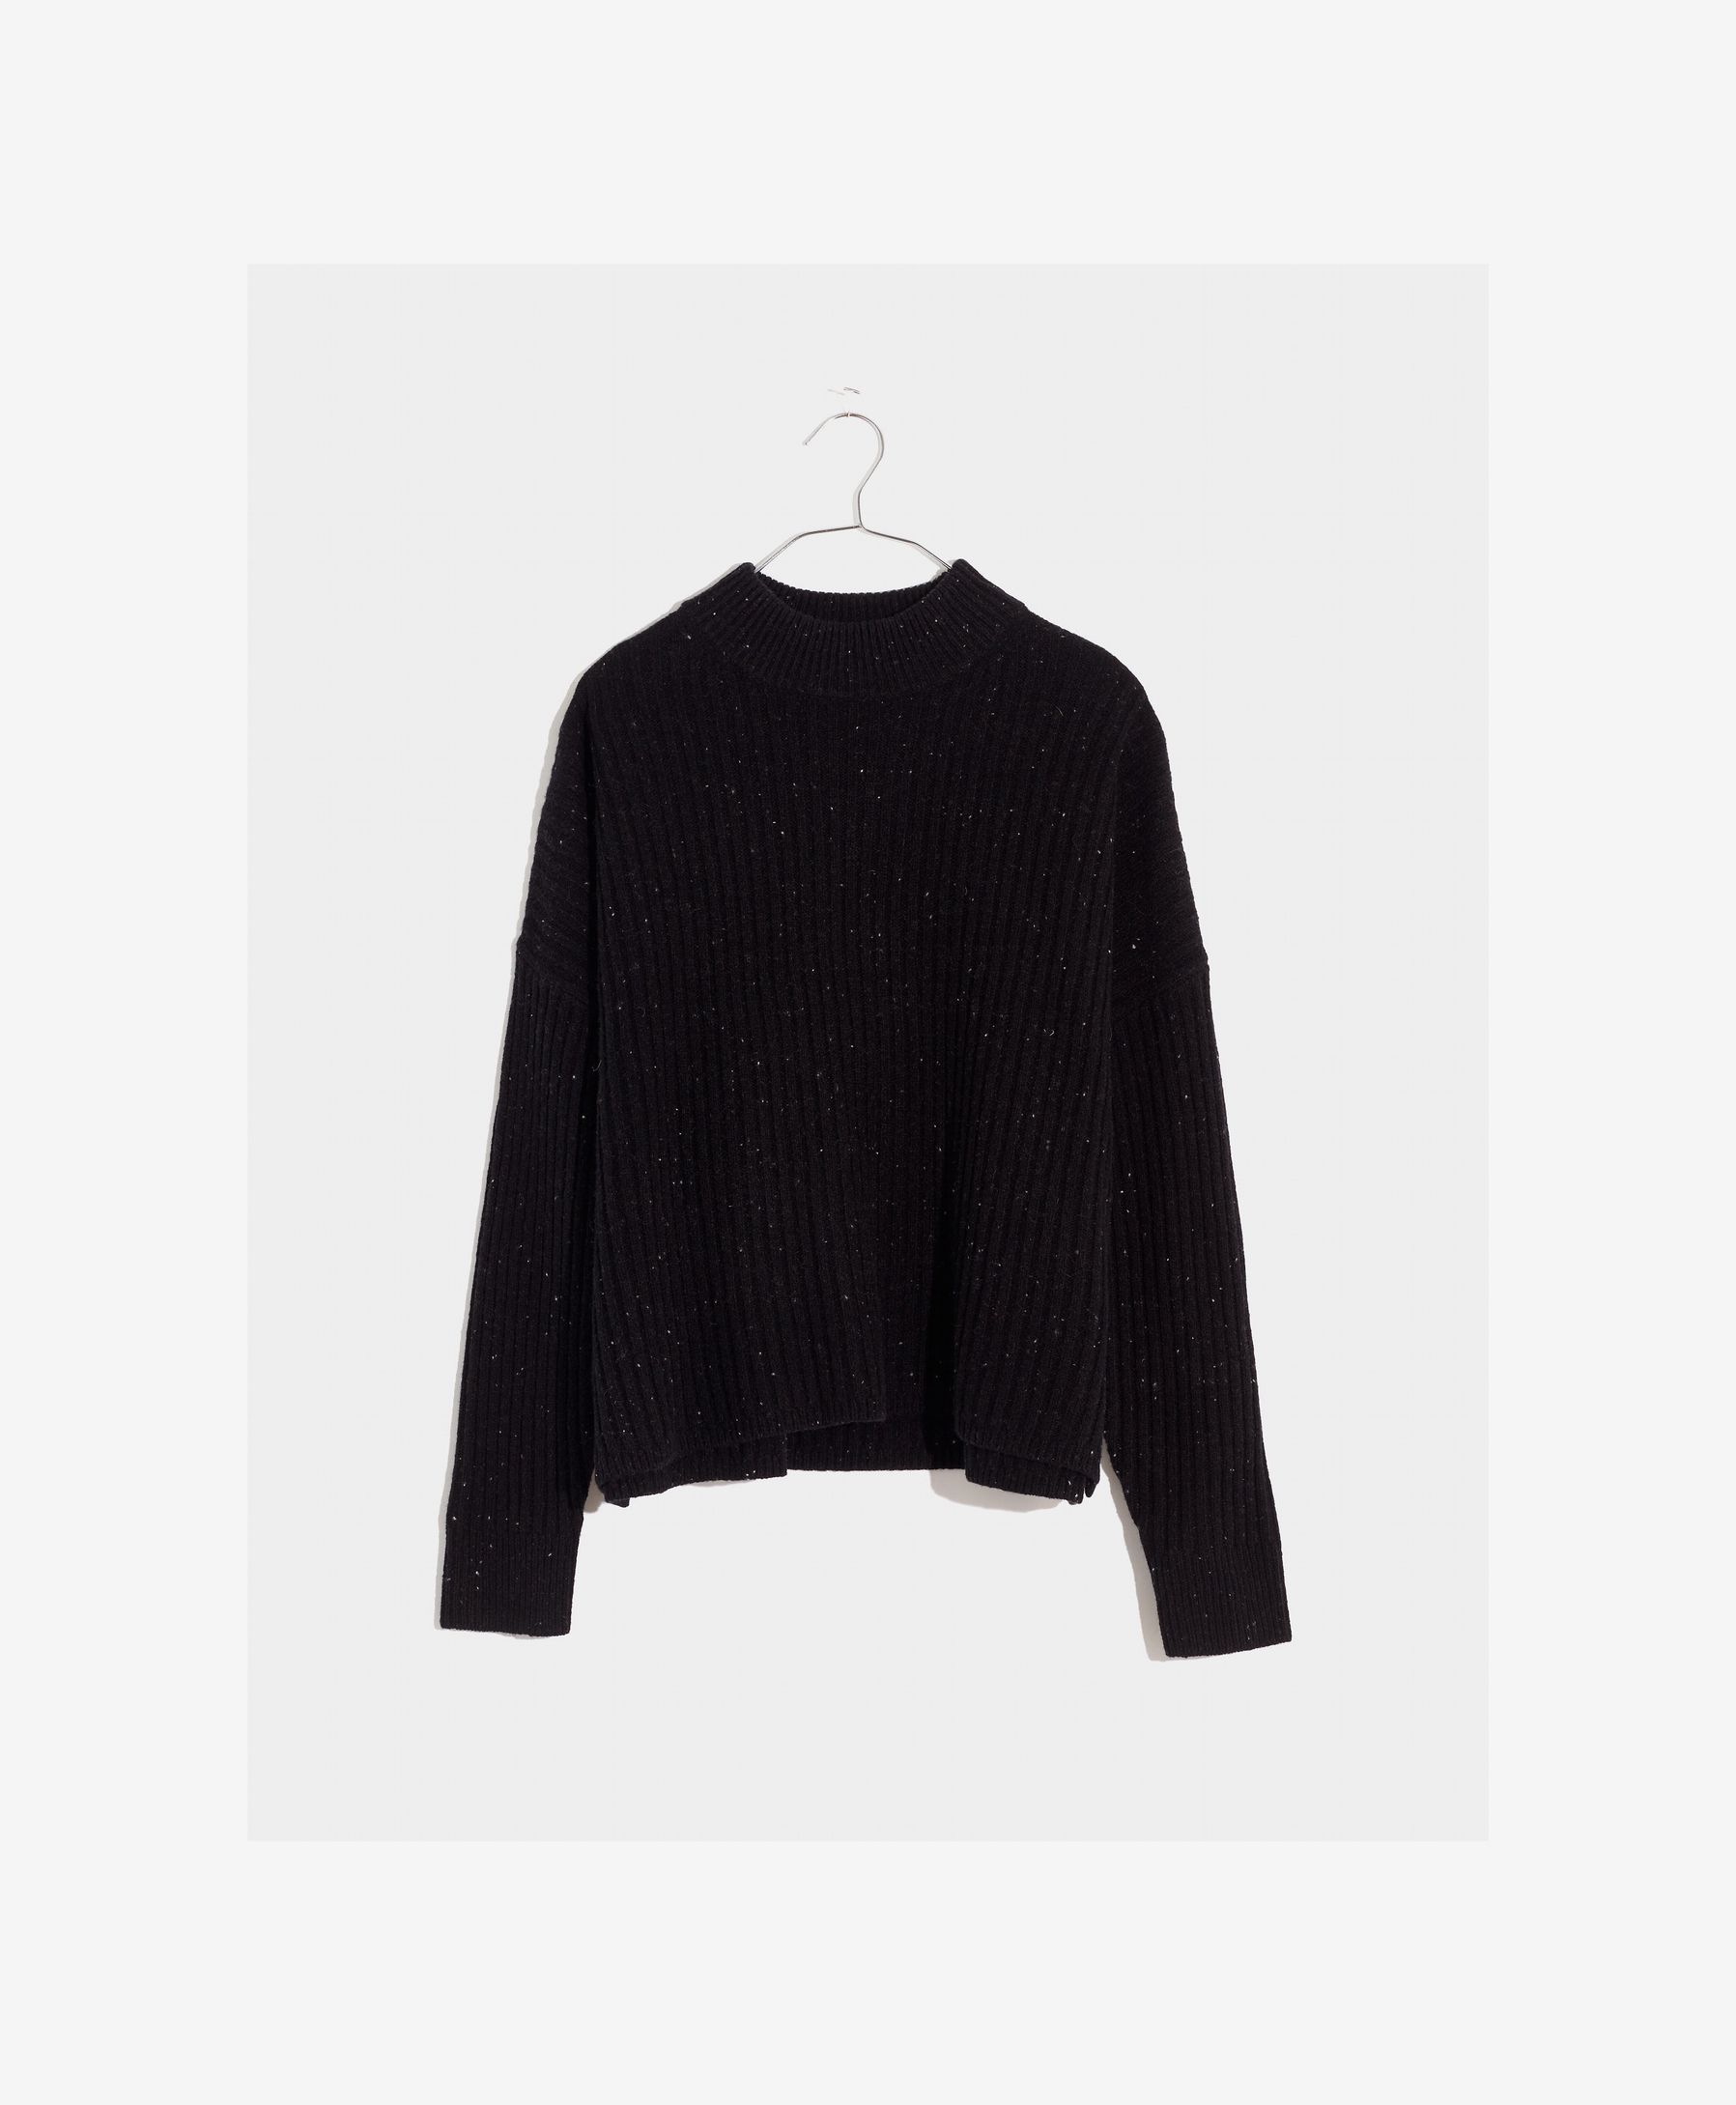 Madewell Cashmere Sweater Secret Stock Sale 2022 | The Strategist